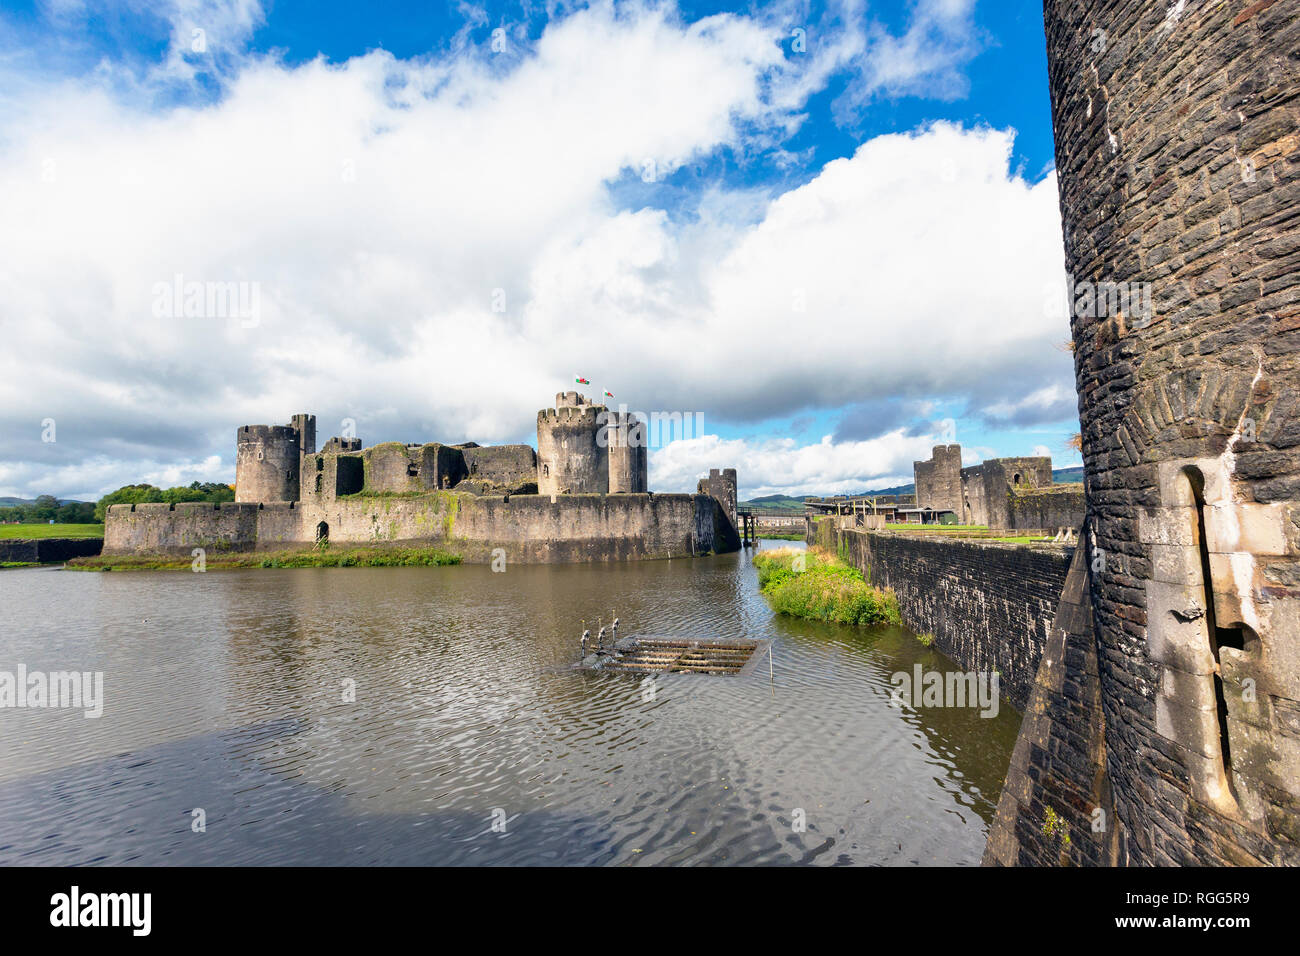 Caerphilly, Caerphilly, Wales, United Kingdom. Caerphilly castle with its moat. Stock Photo